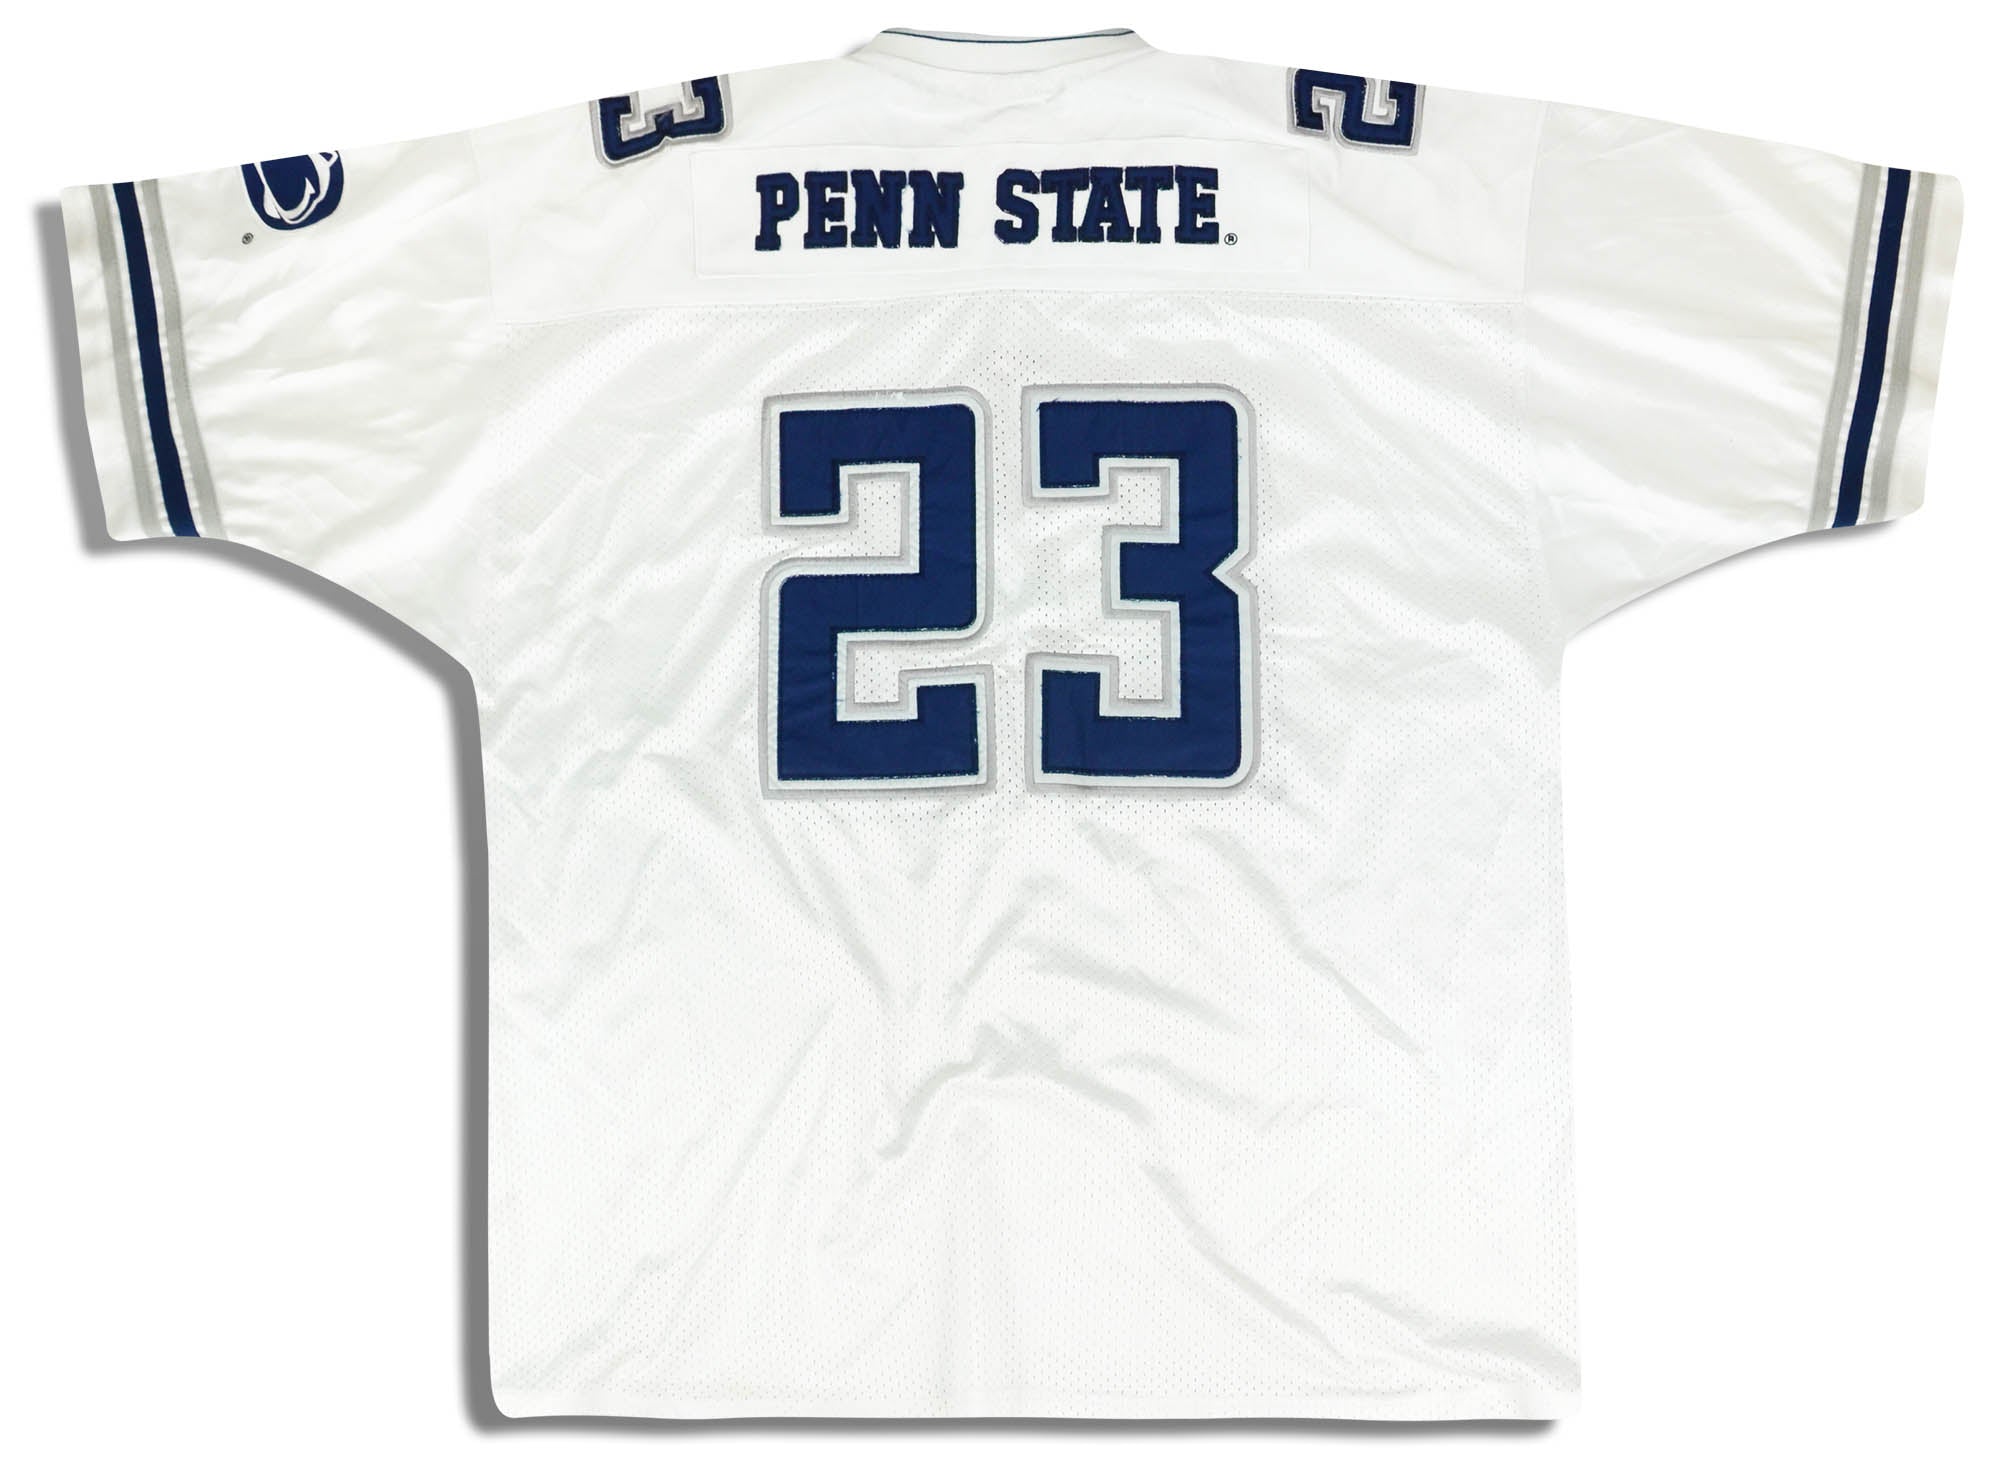 1990's PENN STATE NITTANY LIONS #23 COLOSSEUM JERSEY (HOME) XL